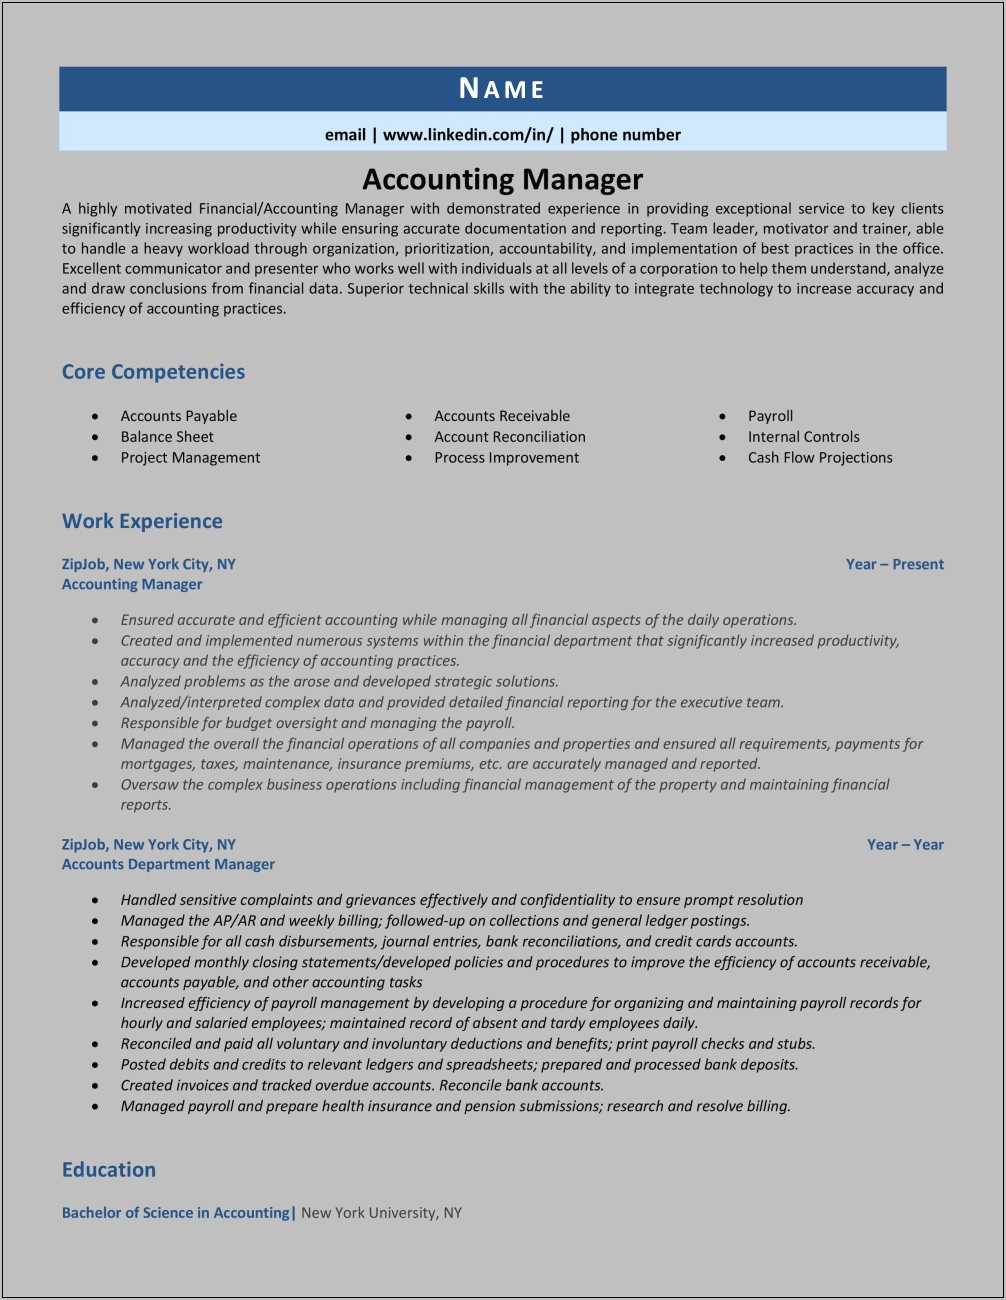 Resume Objective For Accounting Manager